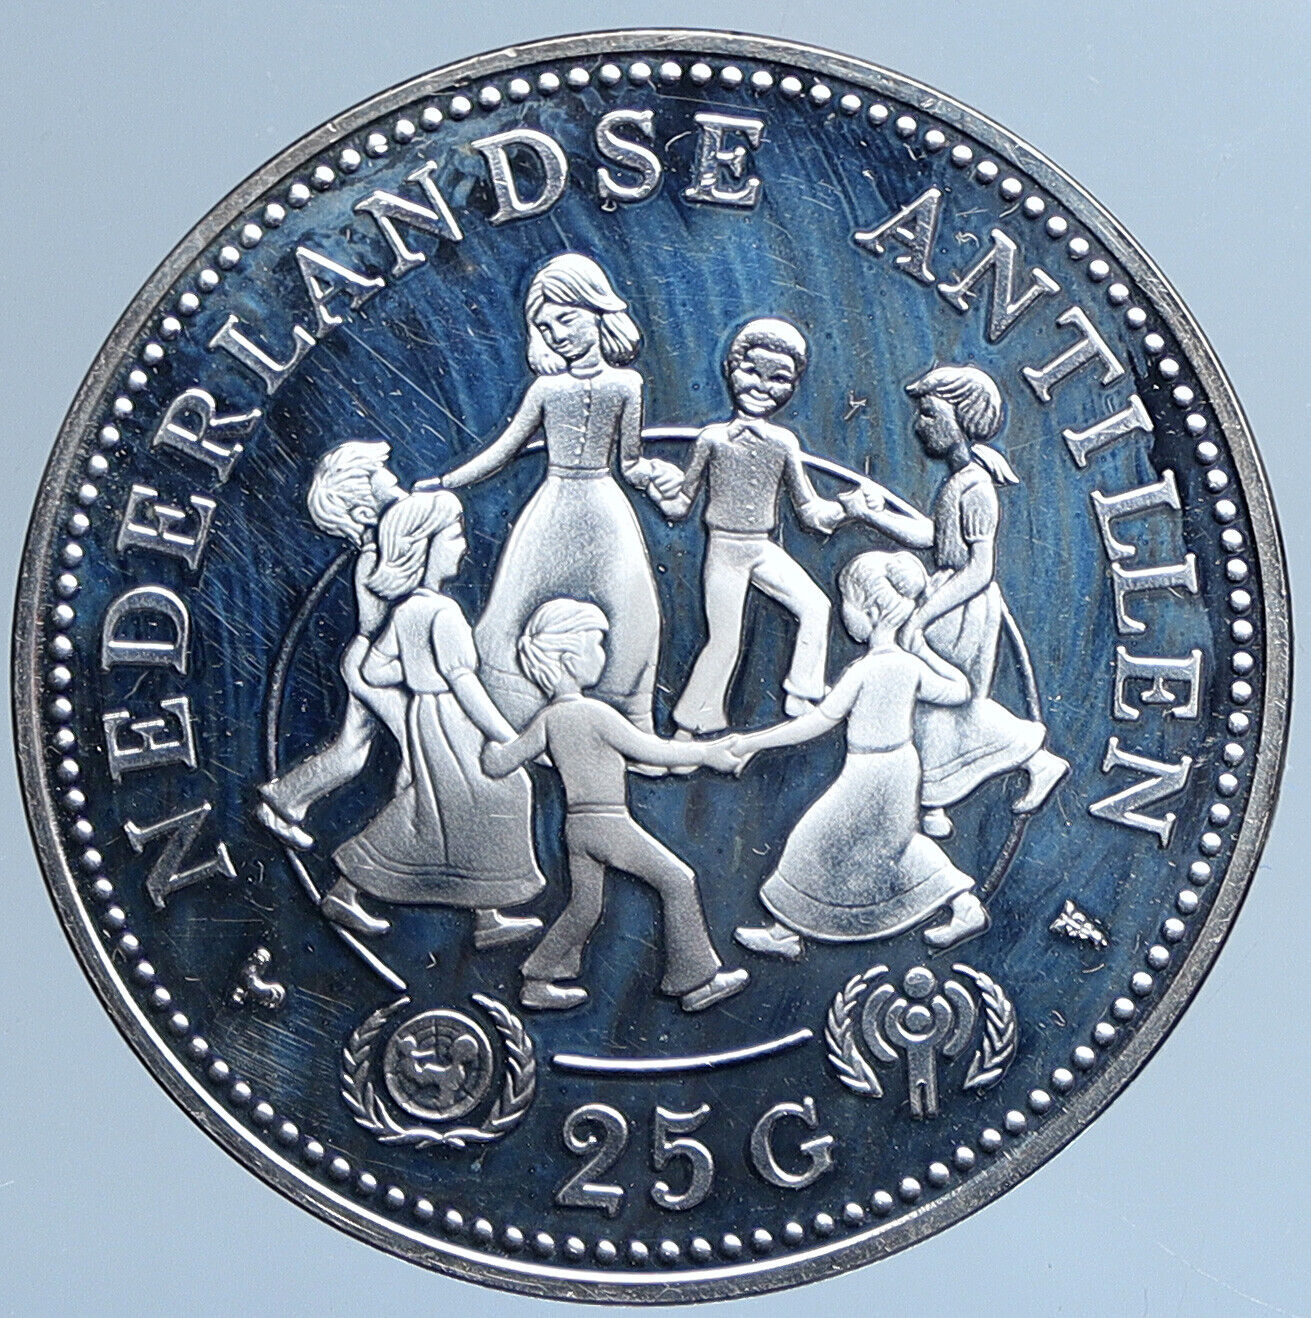 1979 NETHERLANDS ANTILLES Year of the Child Proof Silver 25 Gulden Coin i113894